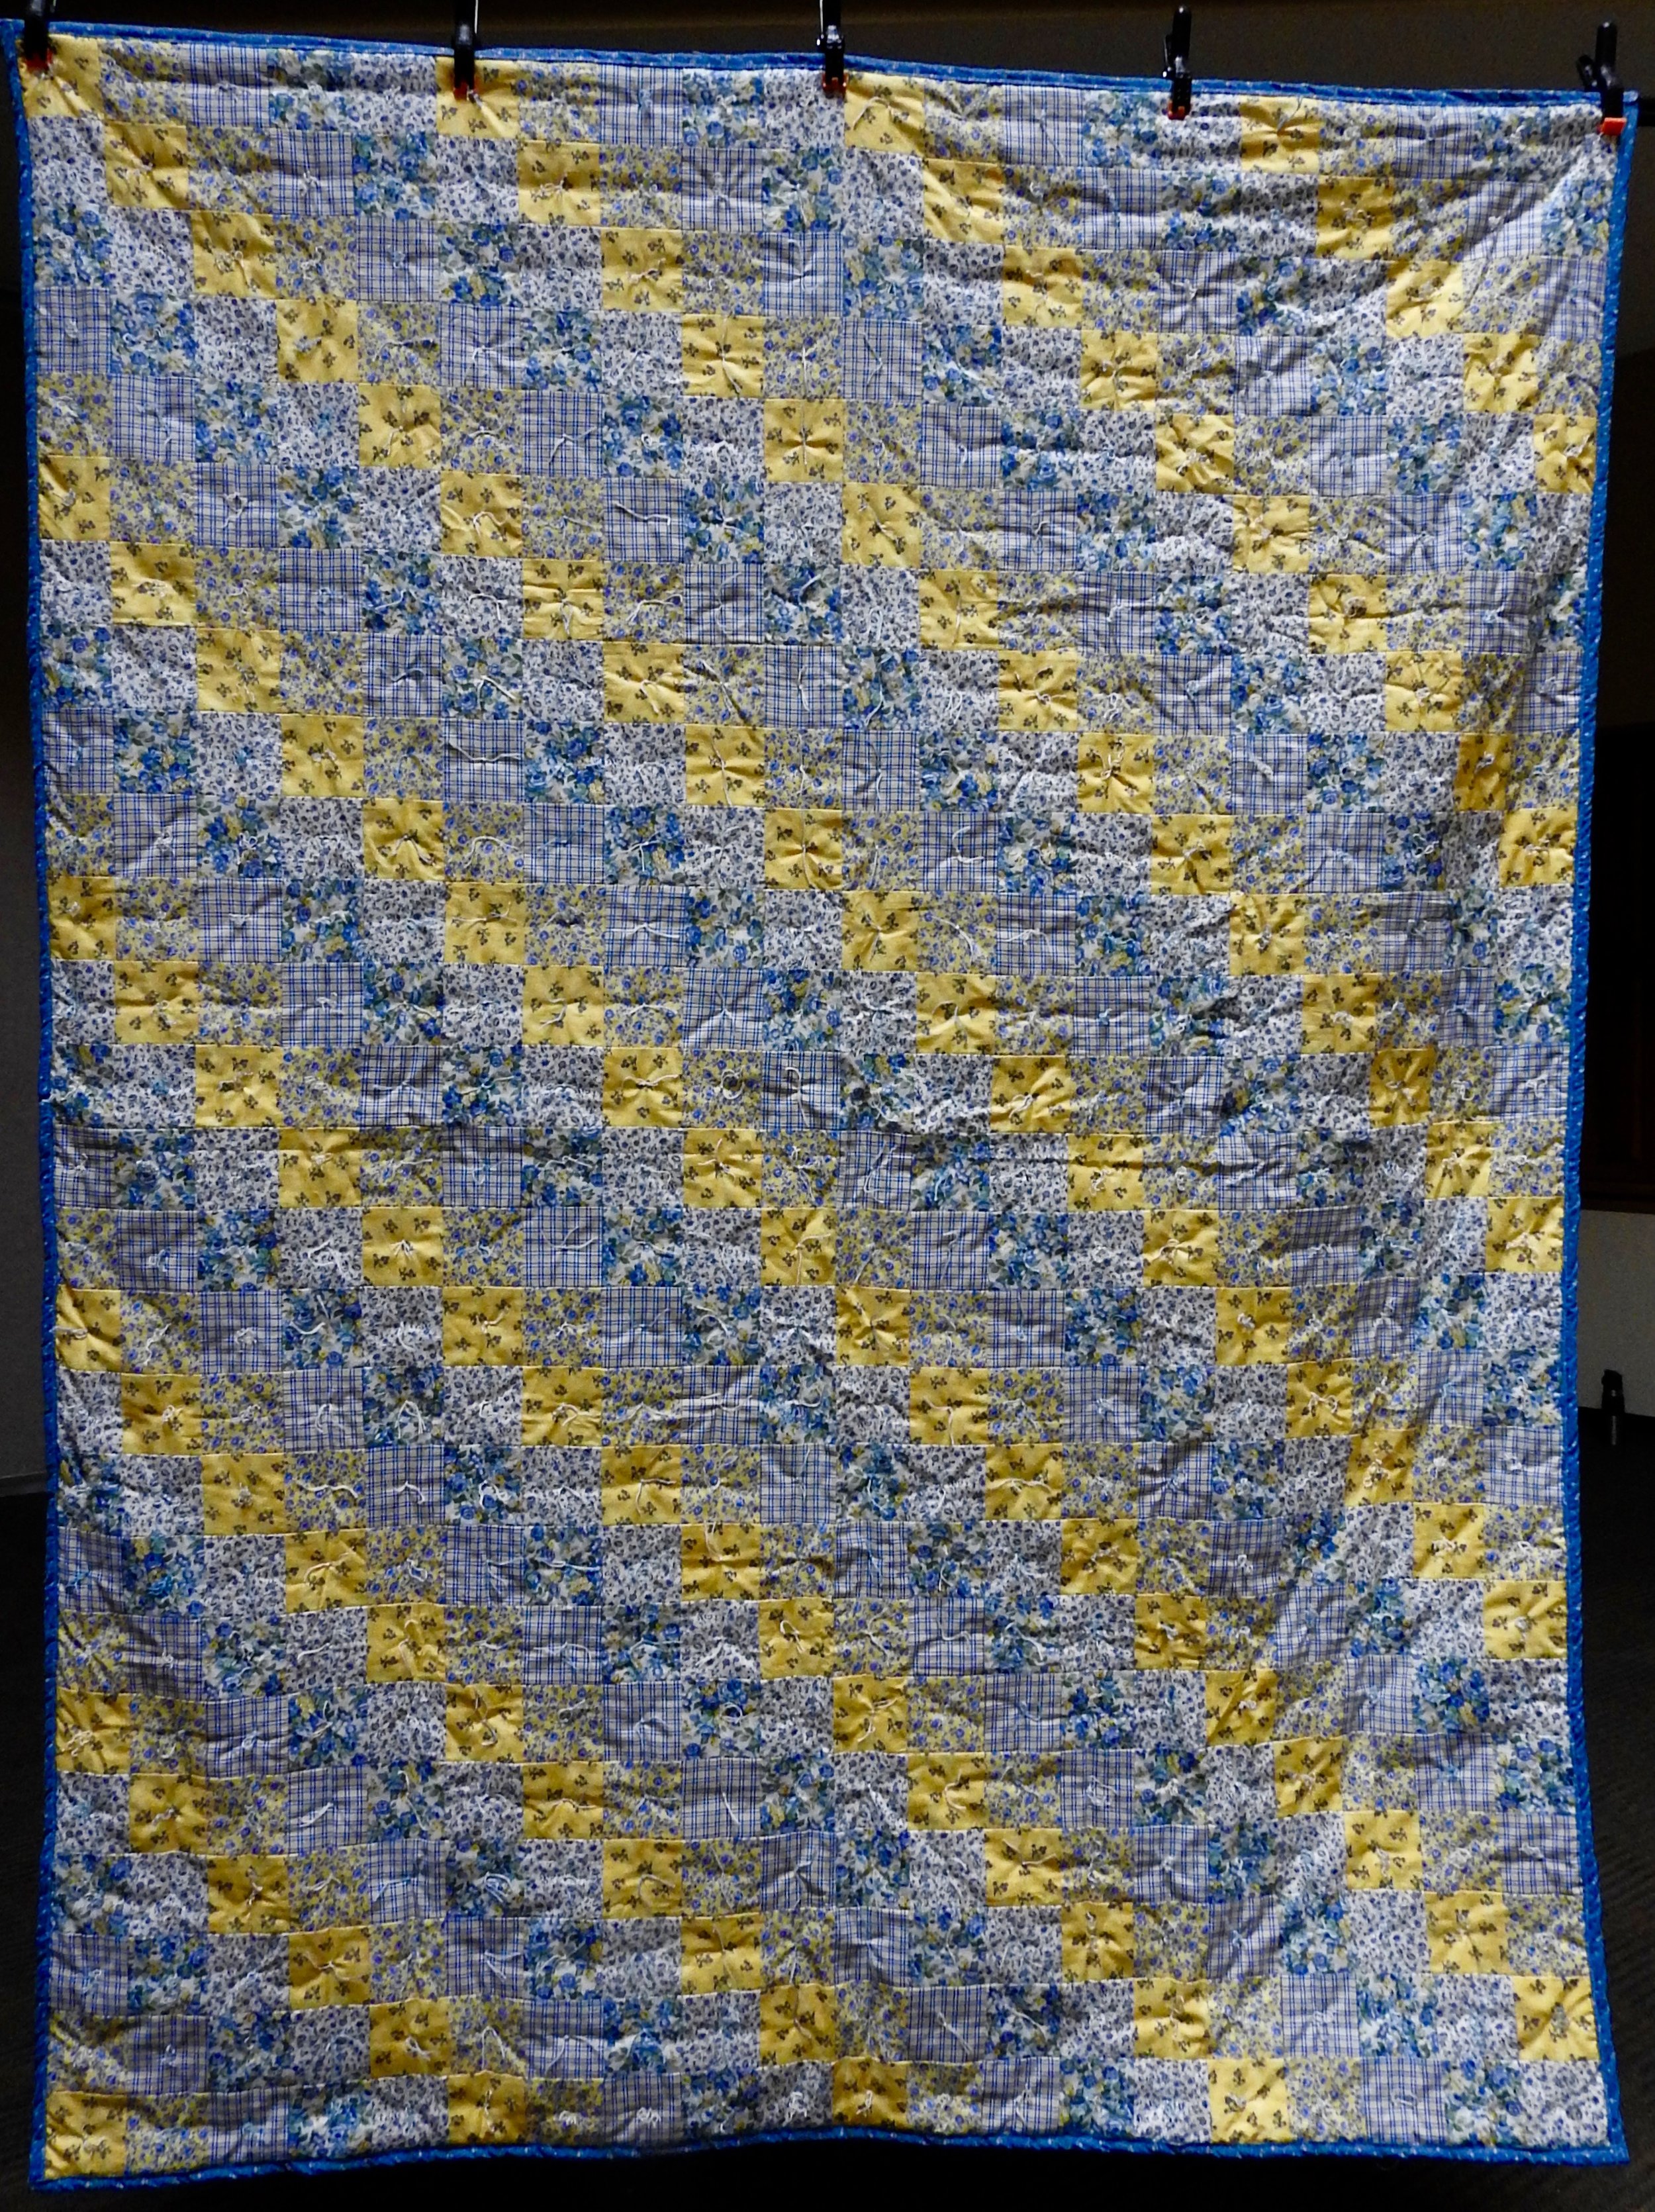 Sunshine Morning Comforter, Piece &amp; Knotted, The Depot Quilt Room, 64 x 84”